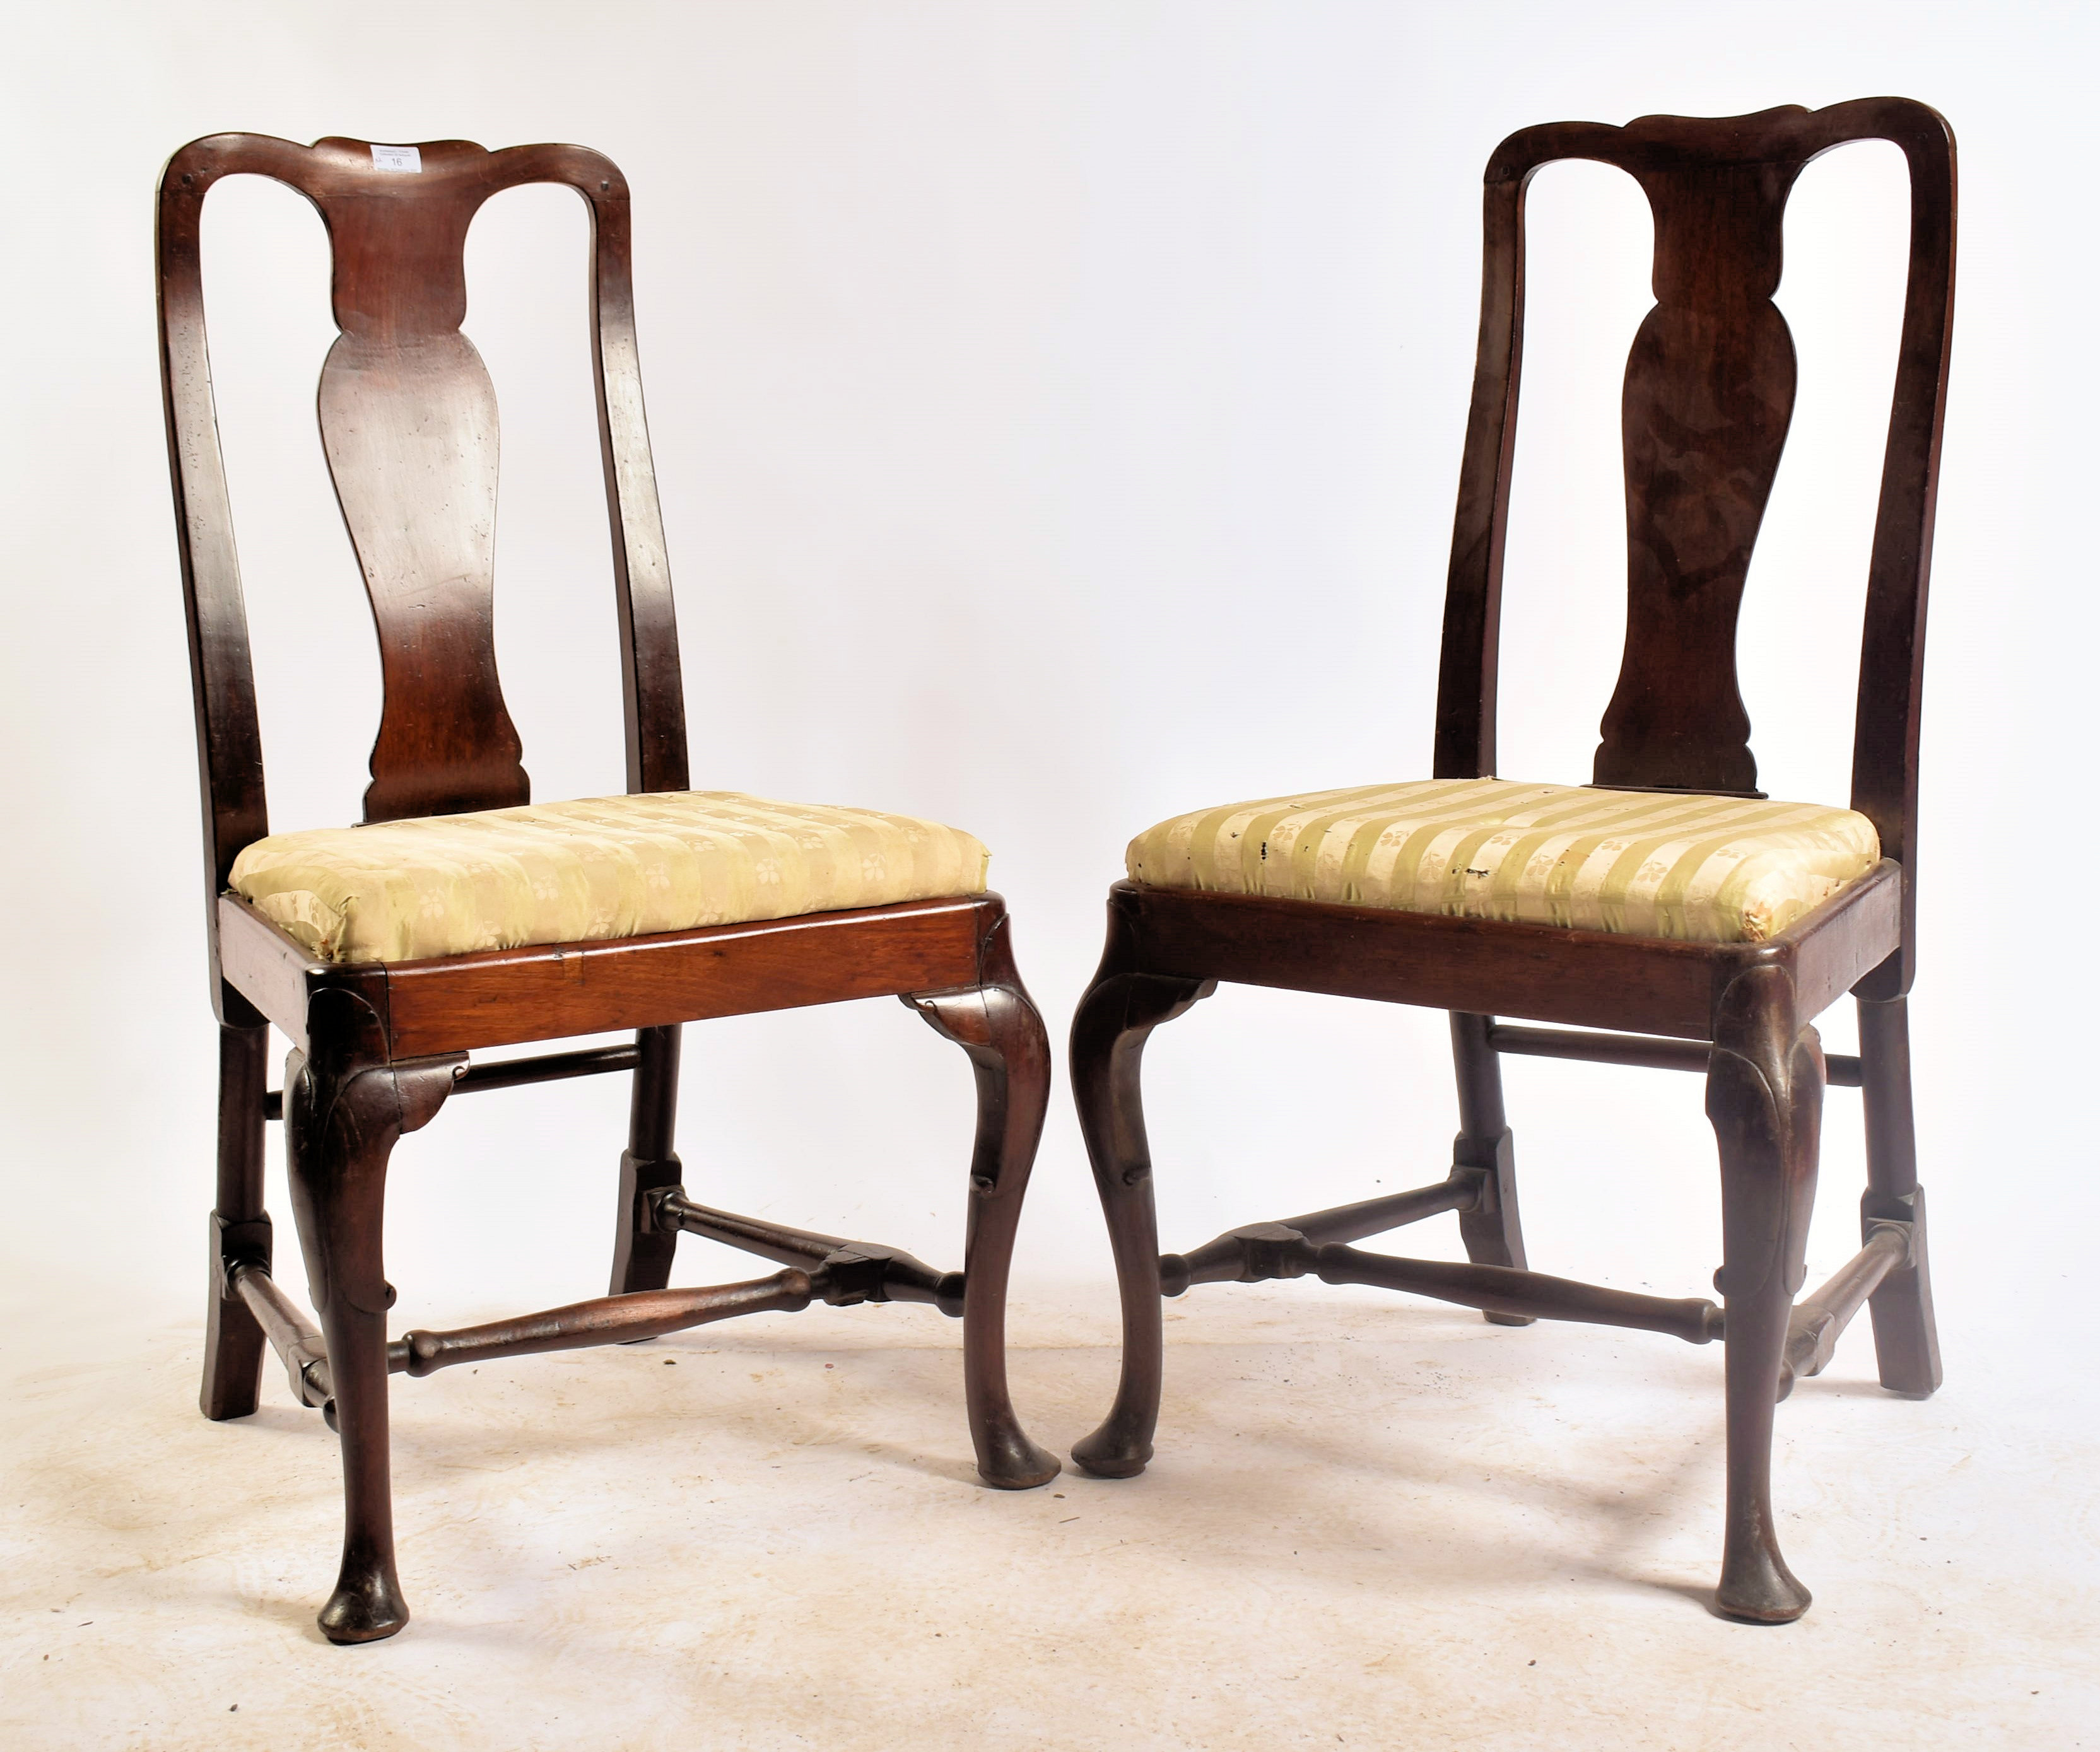 PAIR OF 19TH CENTURY VICTORIAN MAHOGANY DINING CHAIRS